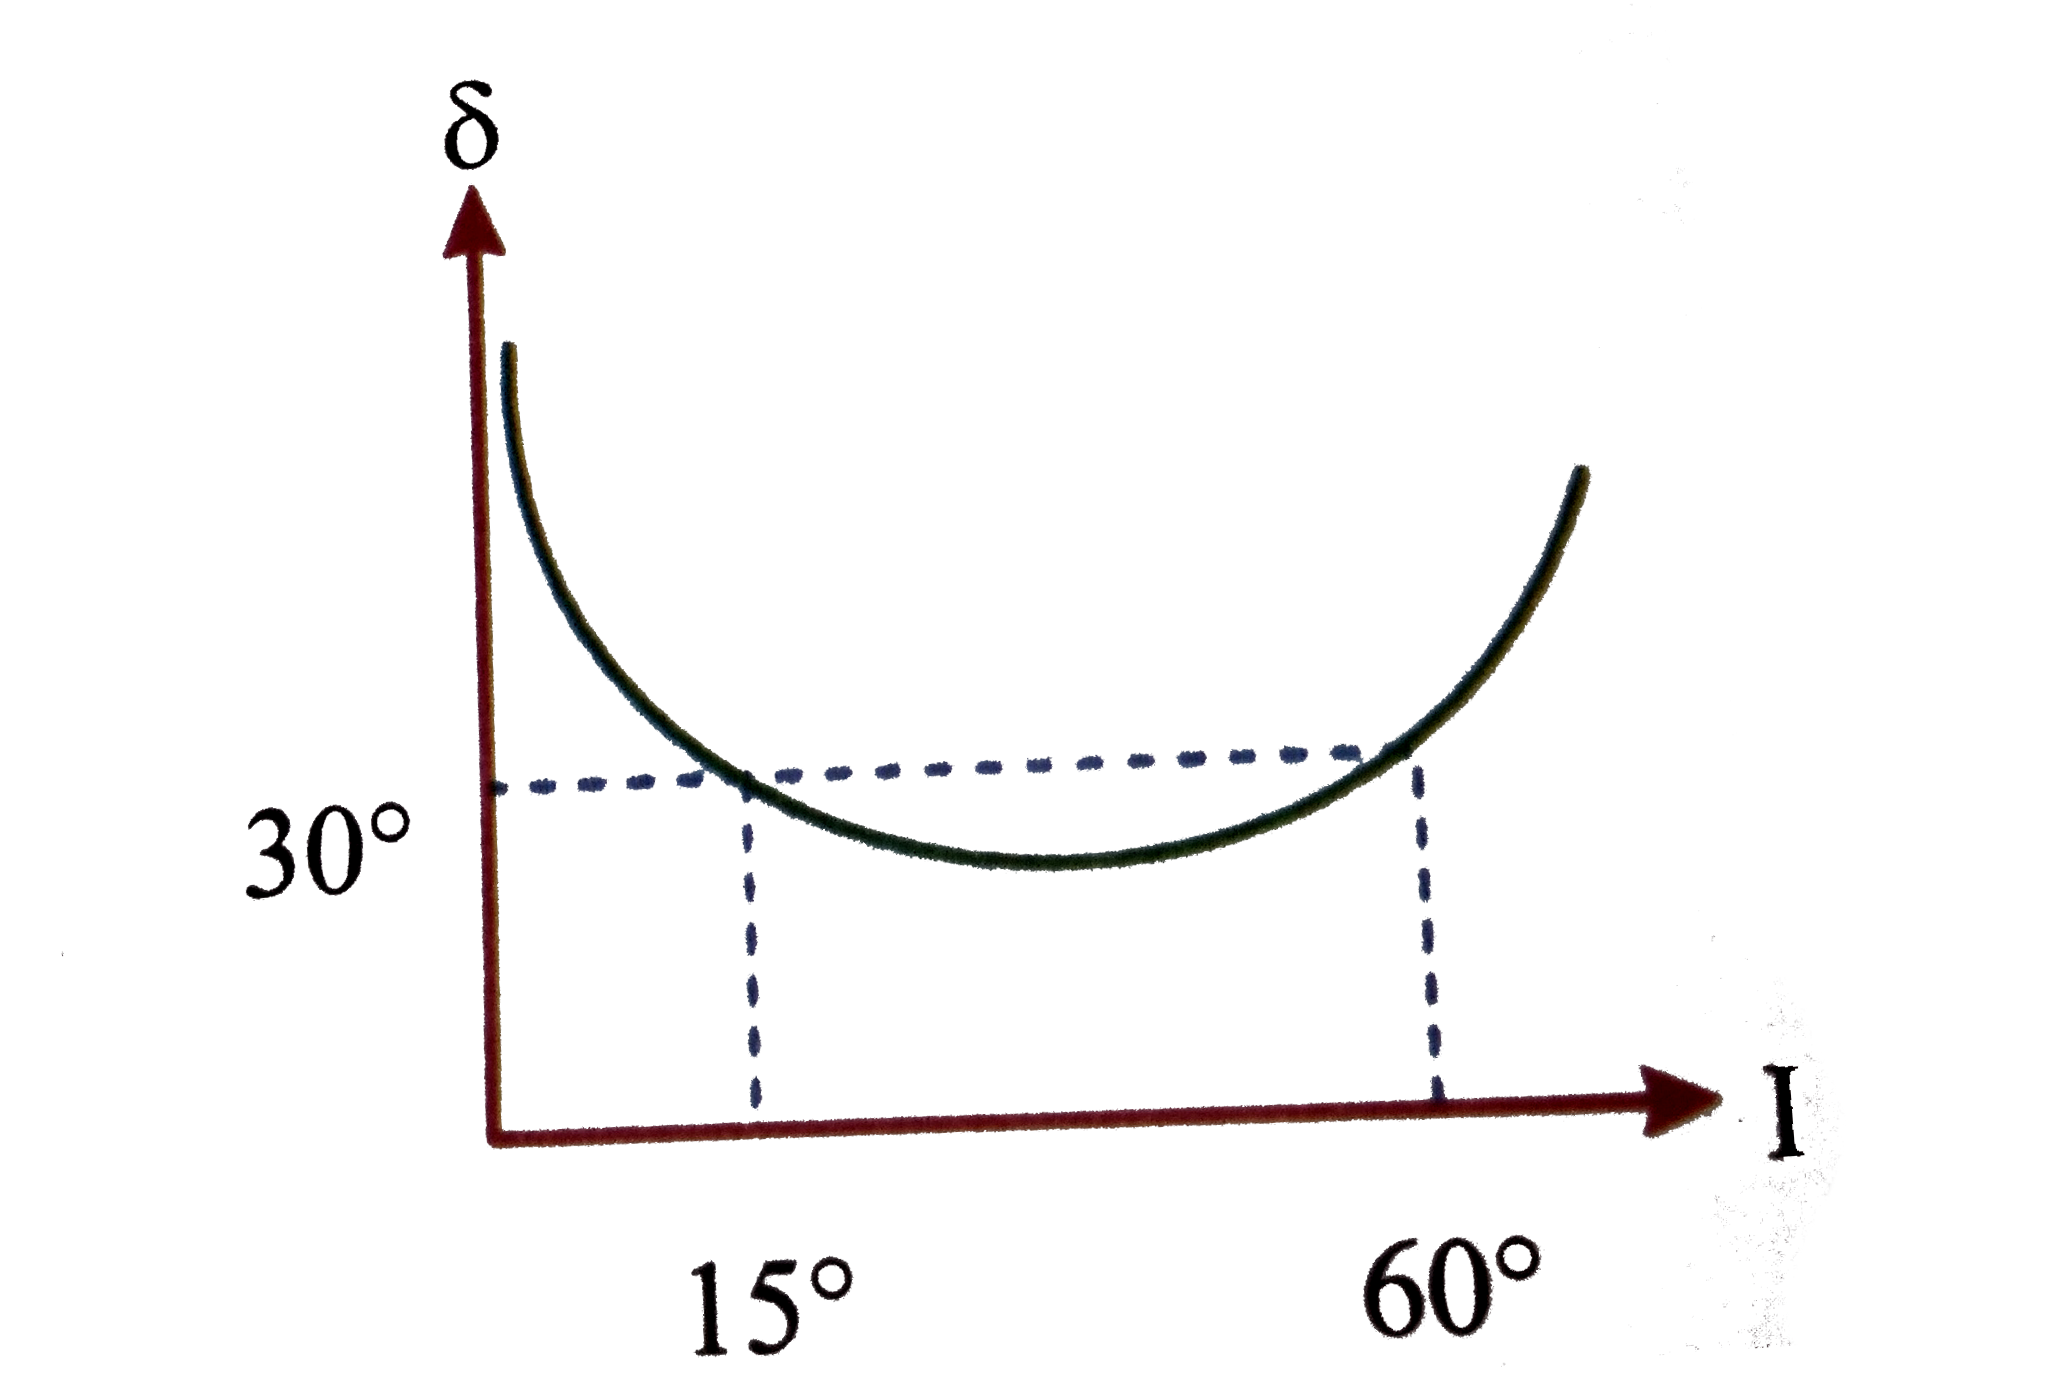 A plot between the angle of deviation and angle of incidence is shown in figure. From the graph one can say that the prism angle is